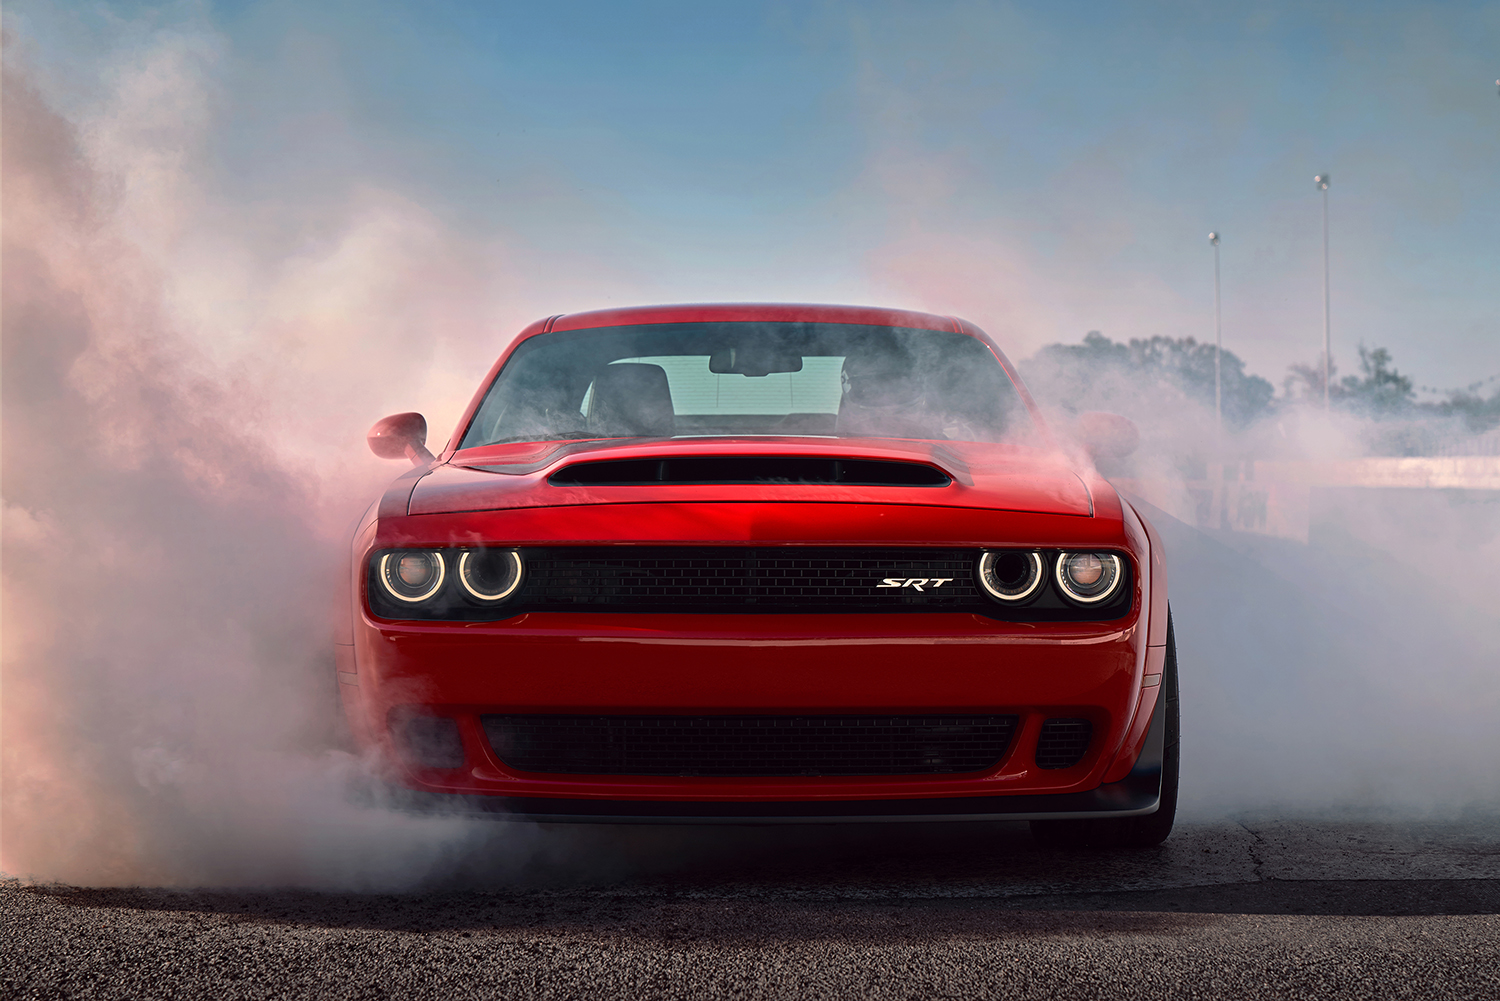 Dodge Demon: Like a Bat Out of Hell